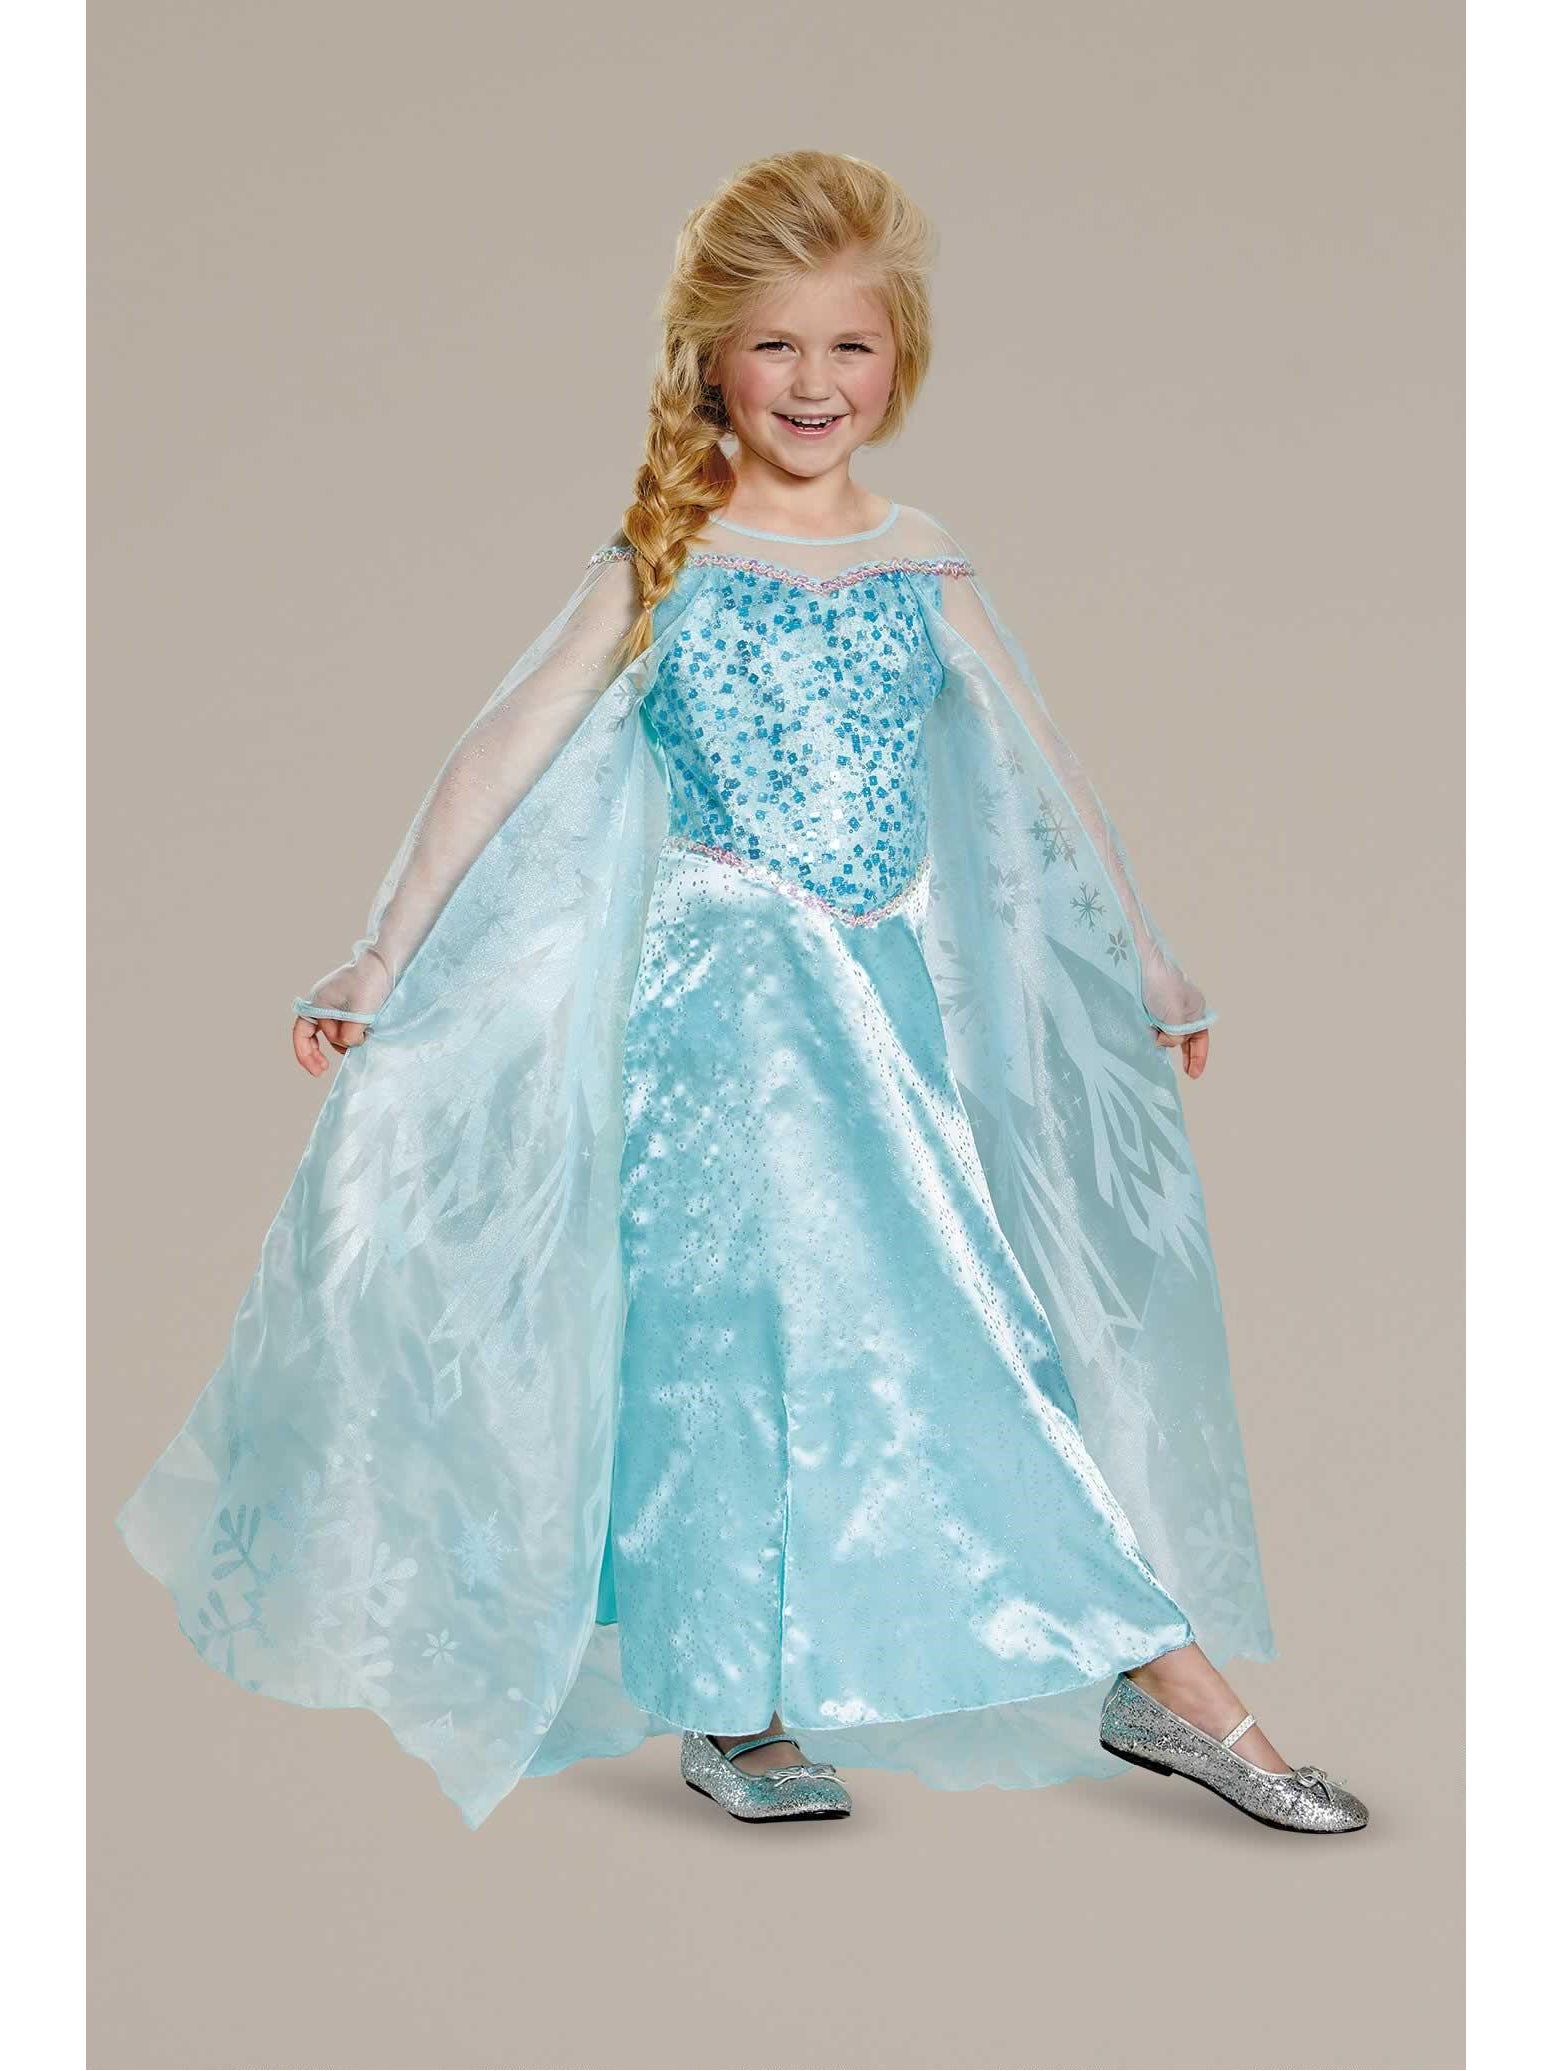 elsa gown for kids